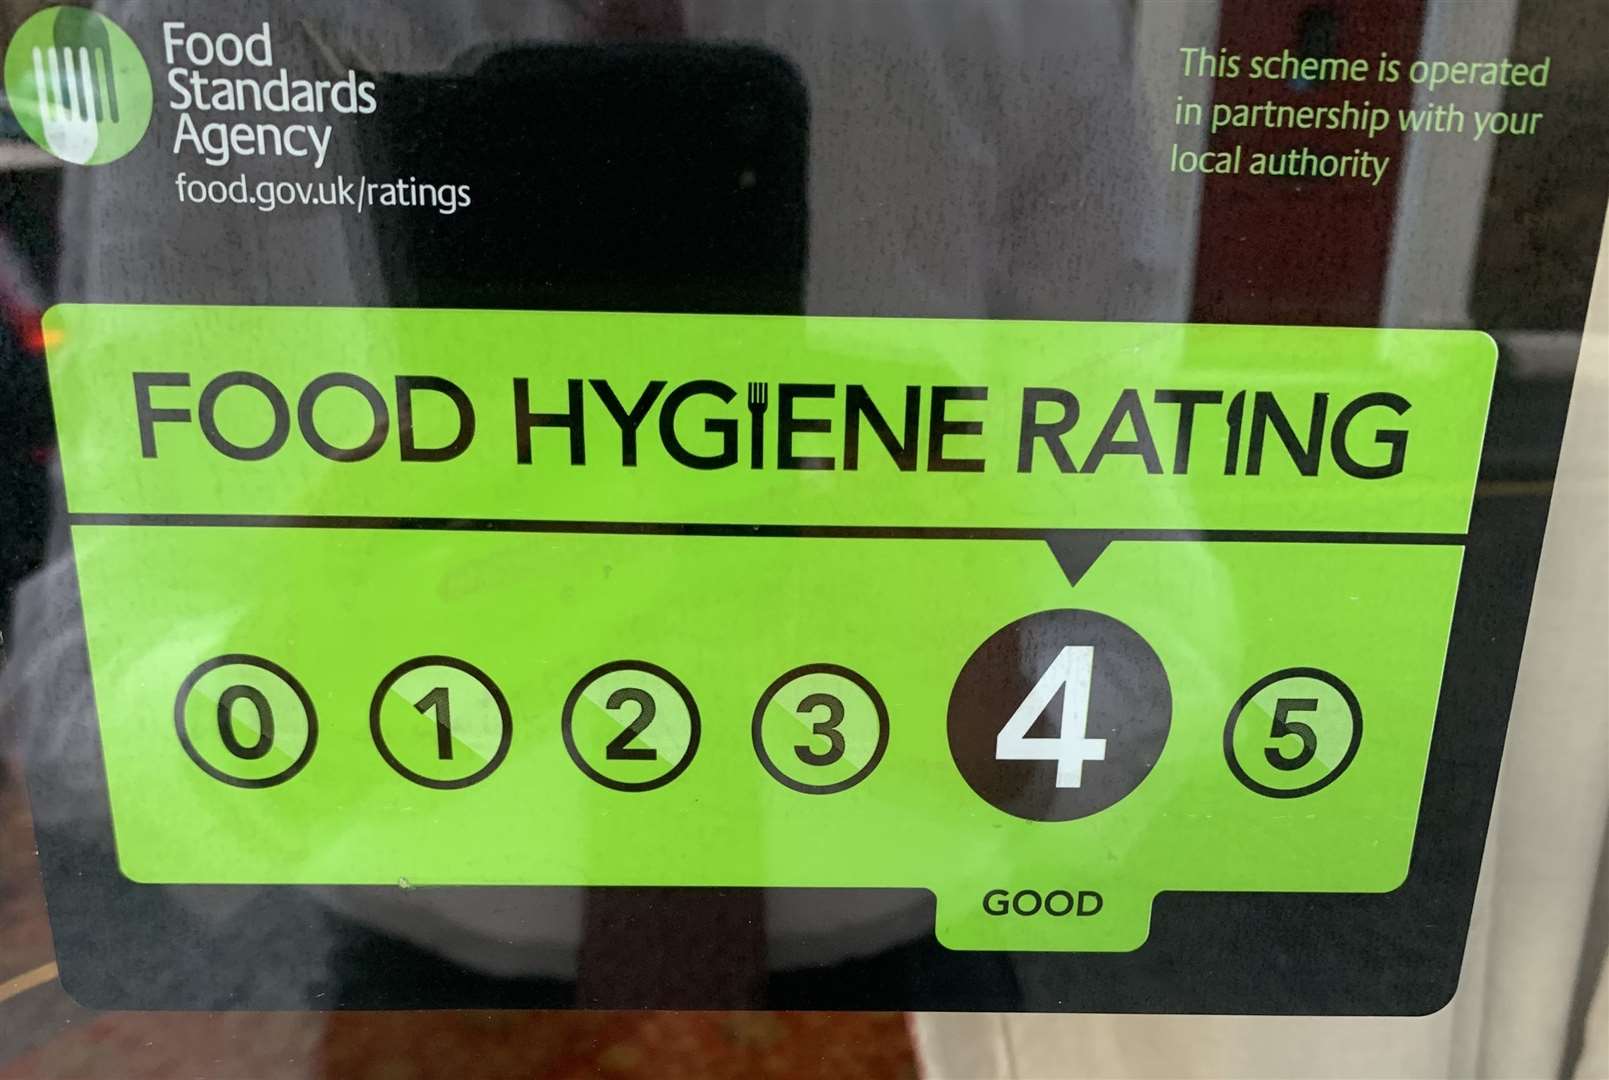 The Spice Hut in Maidstone has been given a new and improved hygiene rating